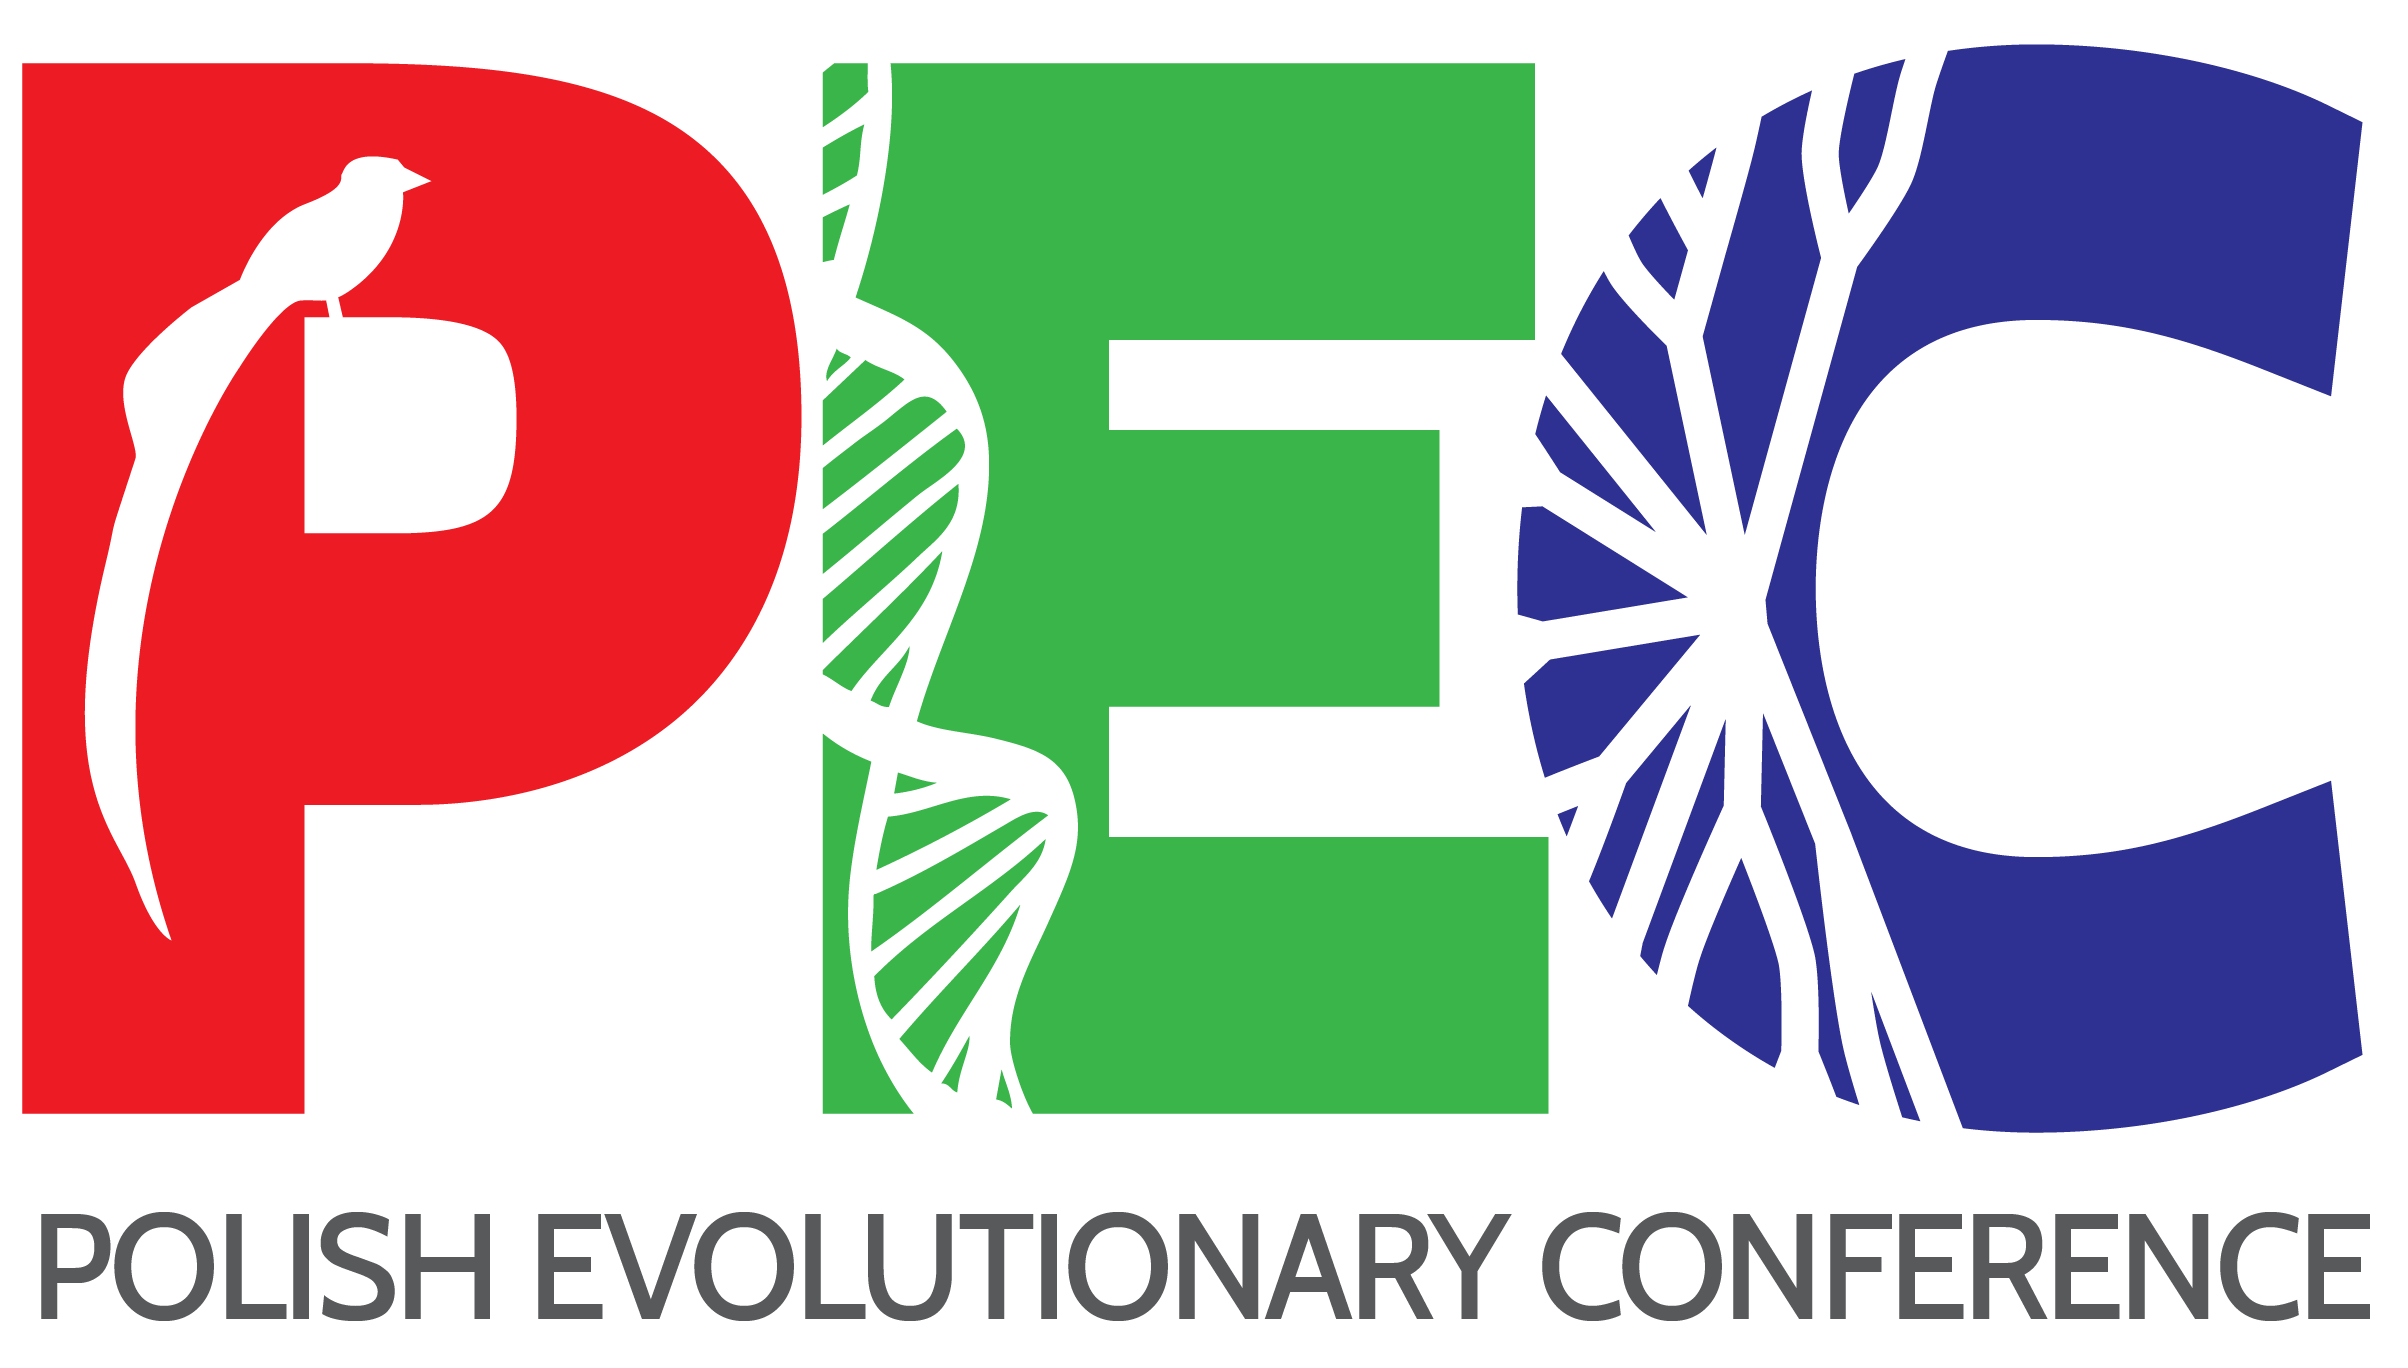 Logo of the conference. Big colorful PEC letters. P is red and inside it sits a bird, probably a male long-tailed widowbird Euplectes progne ("sacabula", wikłacz olbrzymi). The letter E is green and inside it is a DNA double helix. The letter C is blue and inside it is a symbolic cladogram. Under the letters there is an extension of the conference's abbreviated name: Polish Evolutionary Conference.